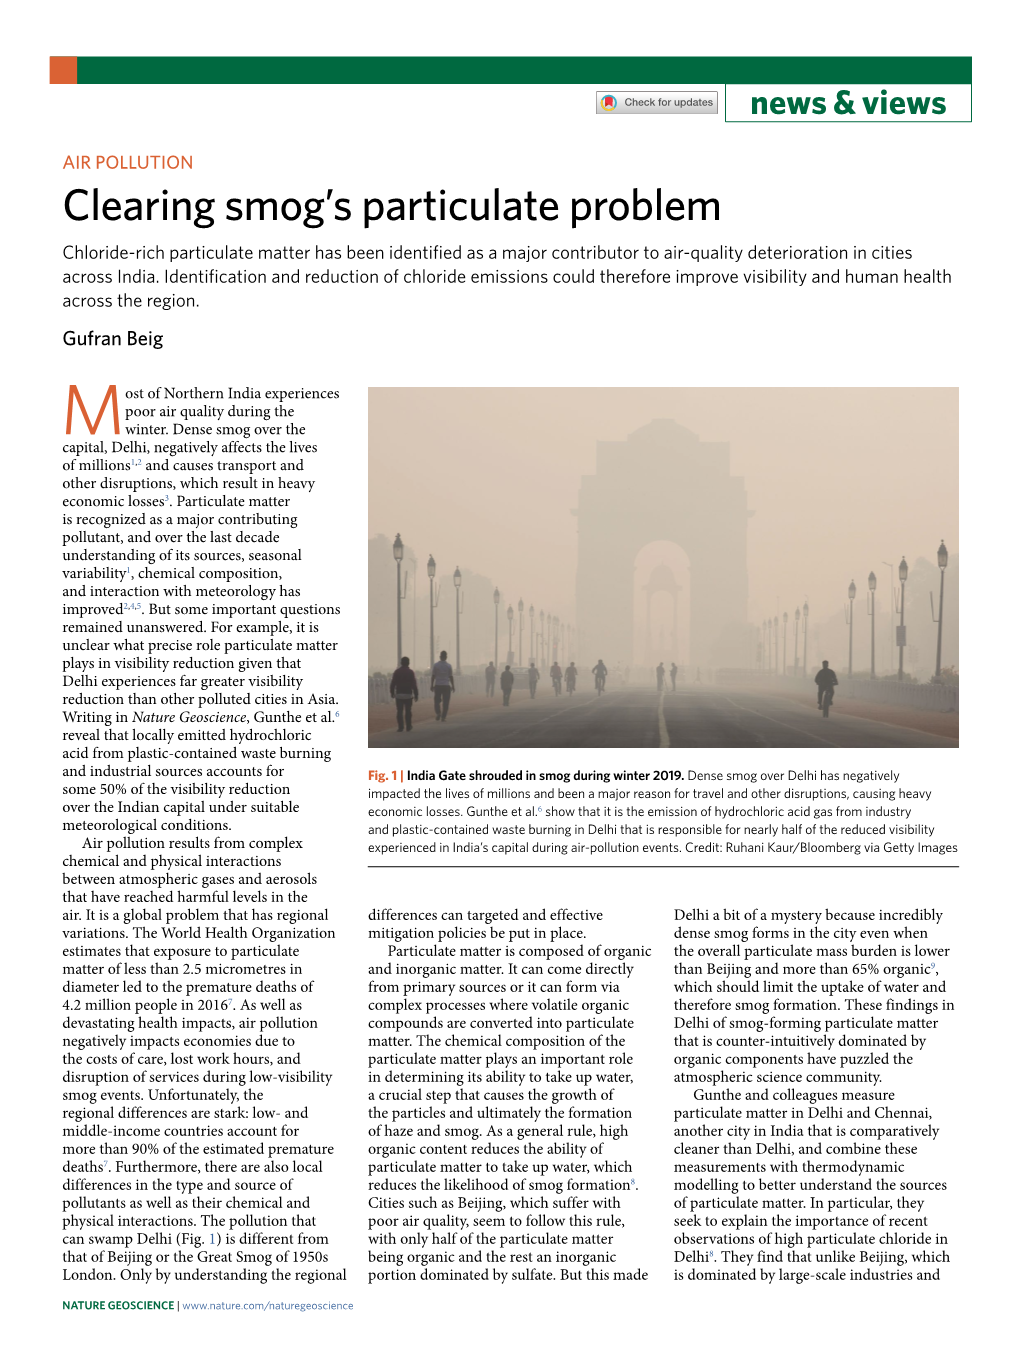 Clearing Smog's Particulate Problem